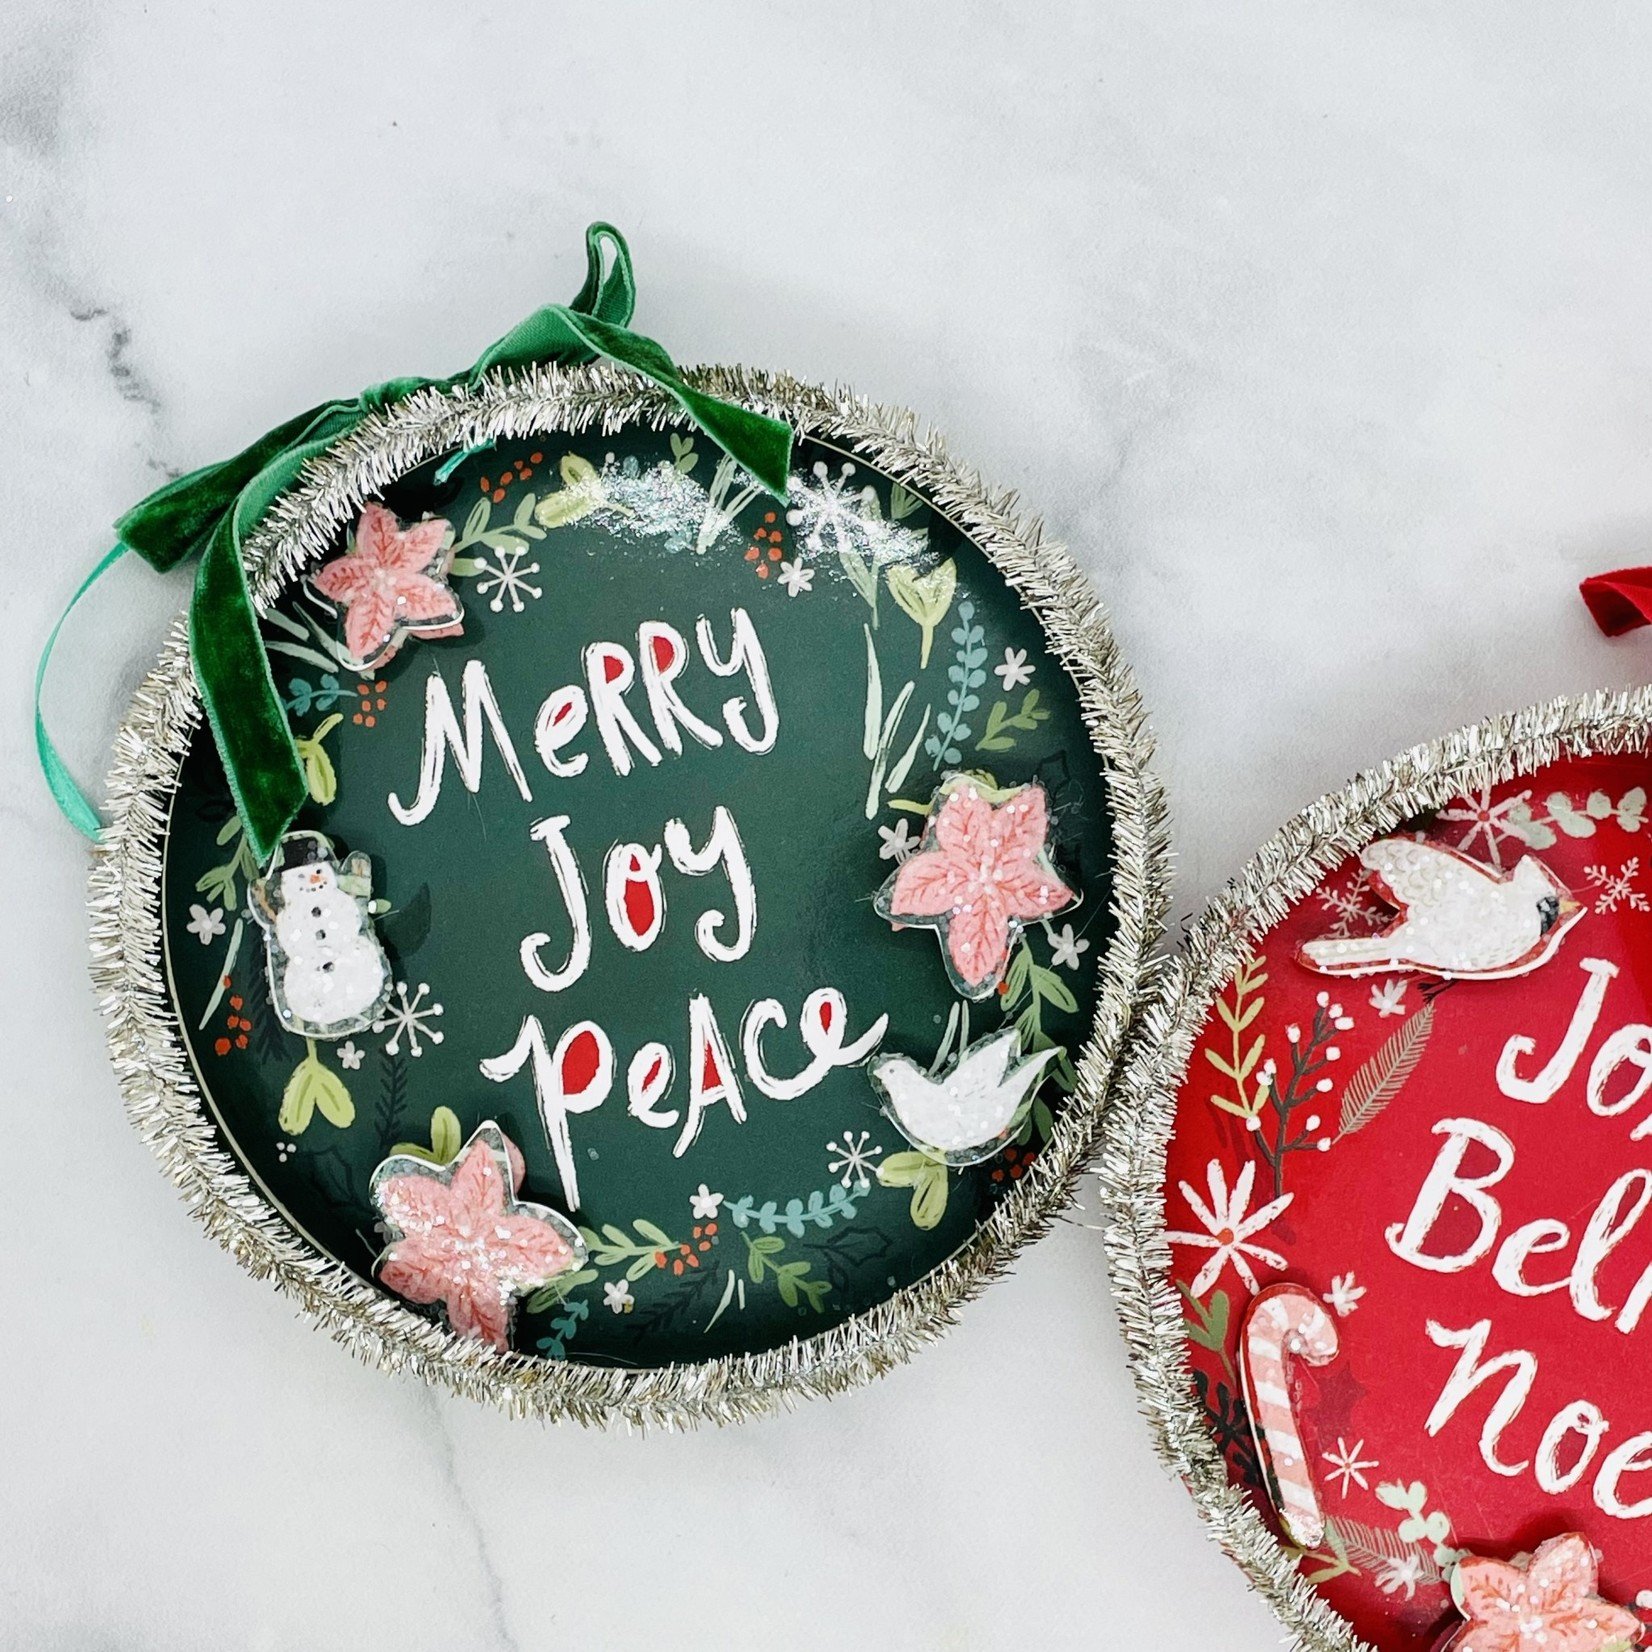 6" R Hand Painted Paper Ornament w/ Holiday Words, Velvet Ribbon & Tinsel